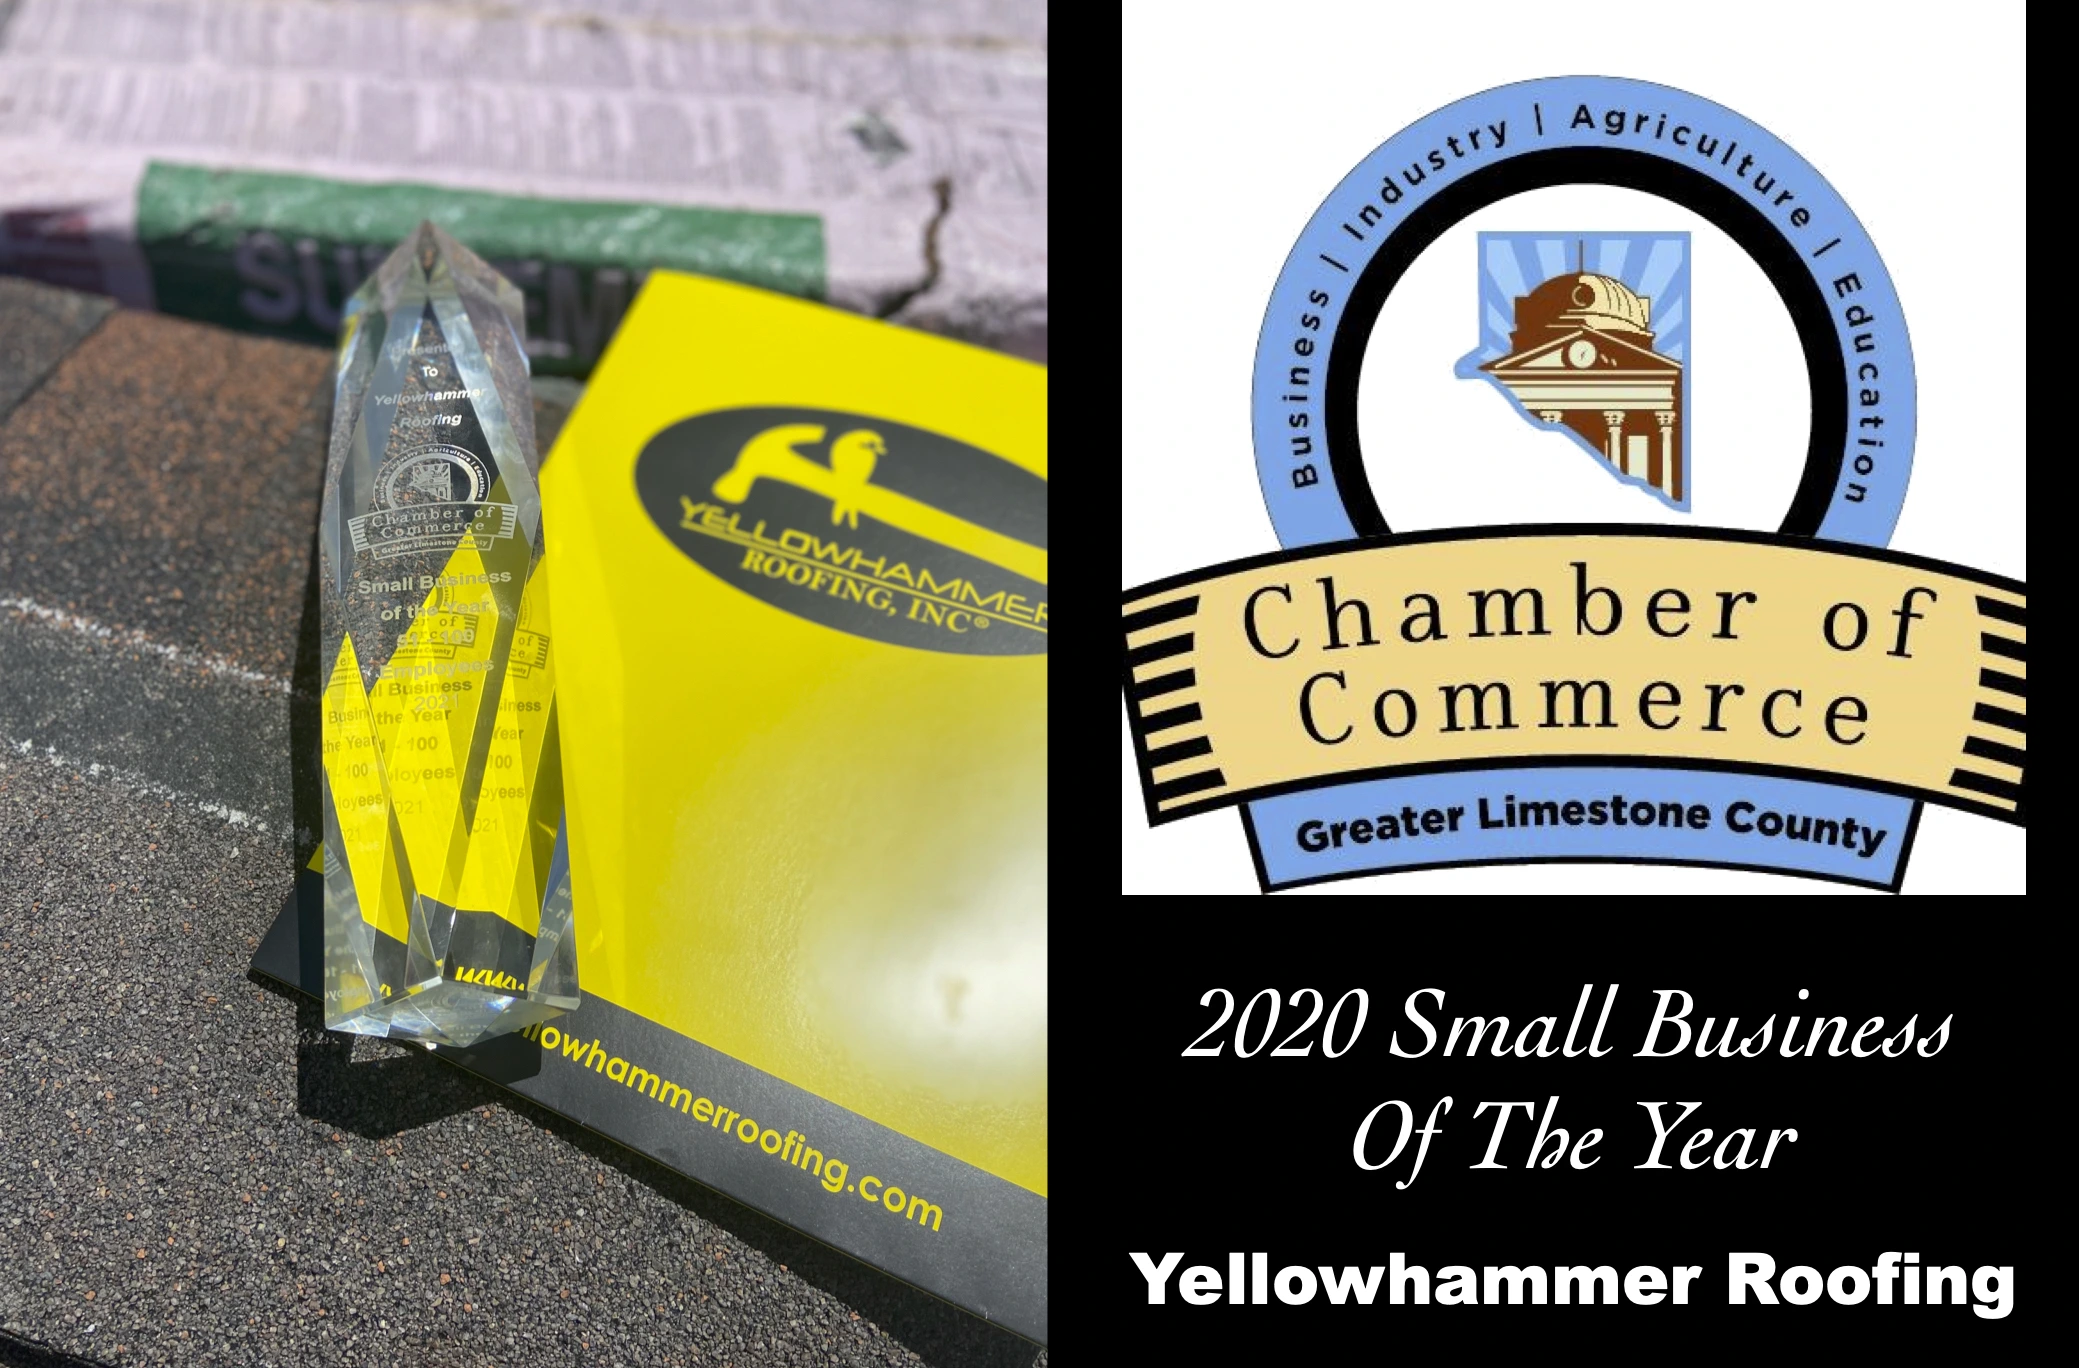 Greater Limestone County Chamber of Commerce 2020 Small Business of the Year award for Yellowhammer Roofing.